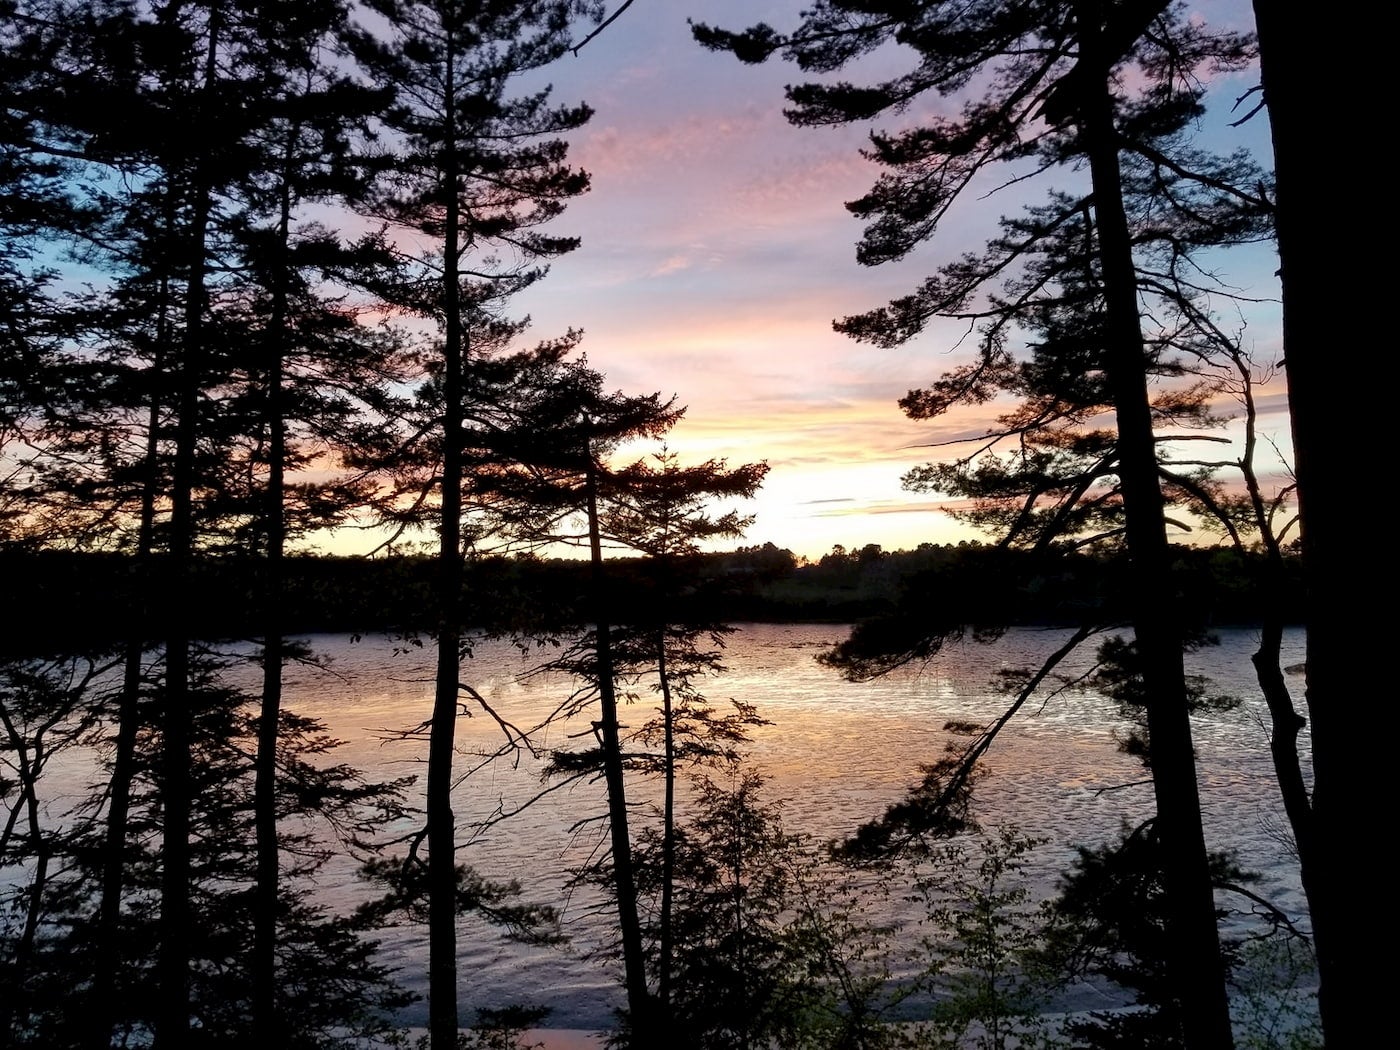 View of the ocean at dusk through the pine trees.